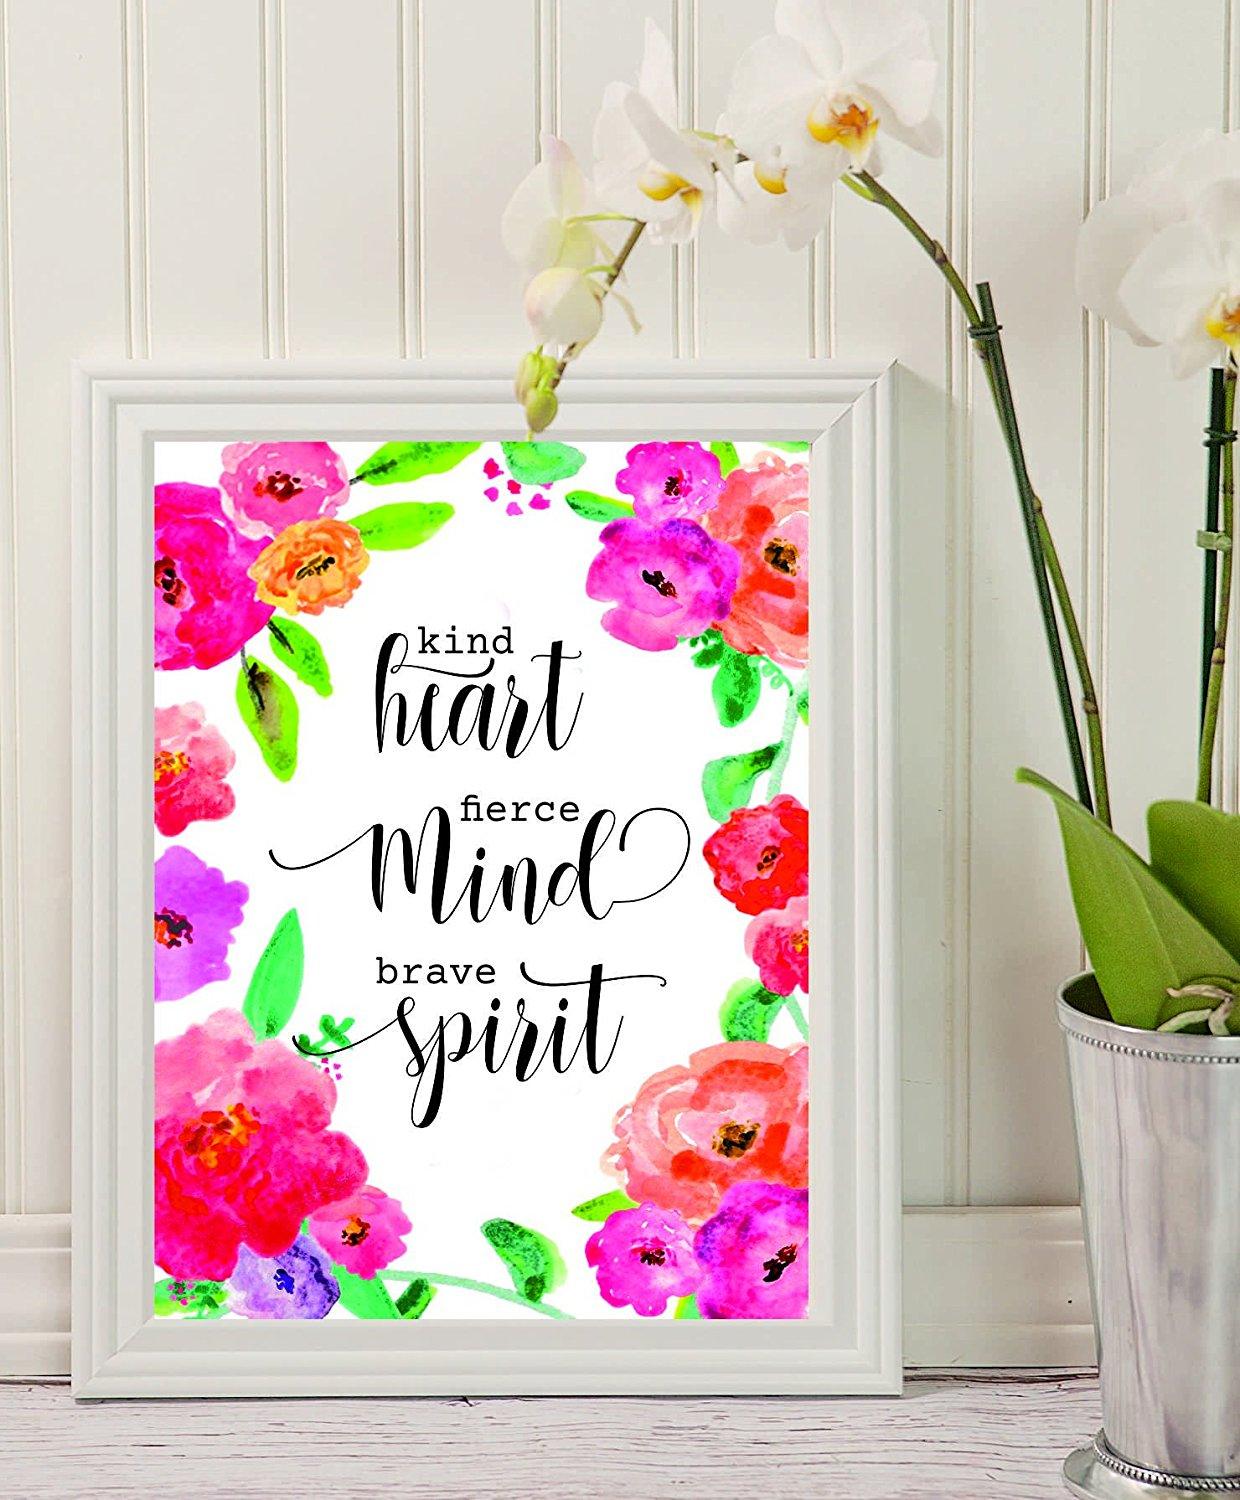 Motivational Print - Kind heart fierce mind brave spirit - living room -  Floral Print - Inspirational Quote - Home Decor - Office Decor - Printable  Decor - Calligraphy Art - positive quotes - kind – BOSTON CREATIVE COMPANY